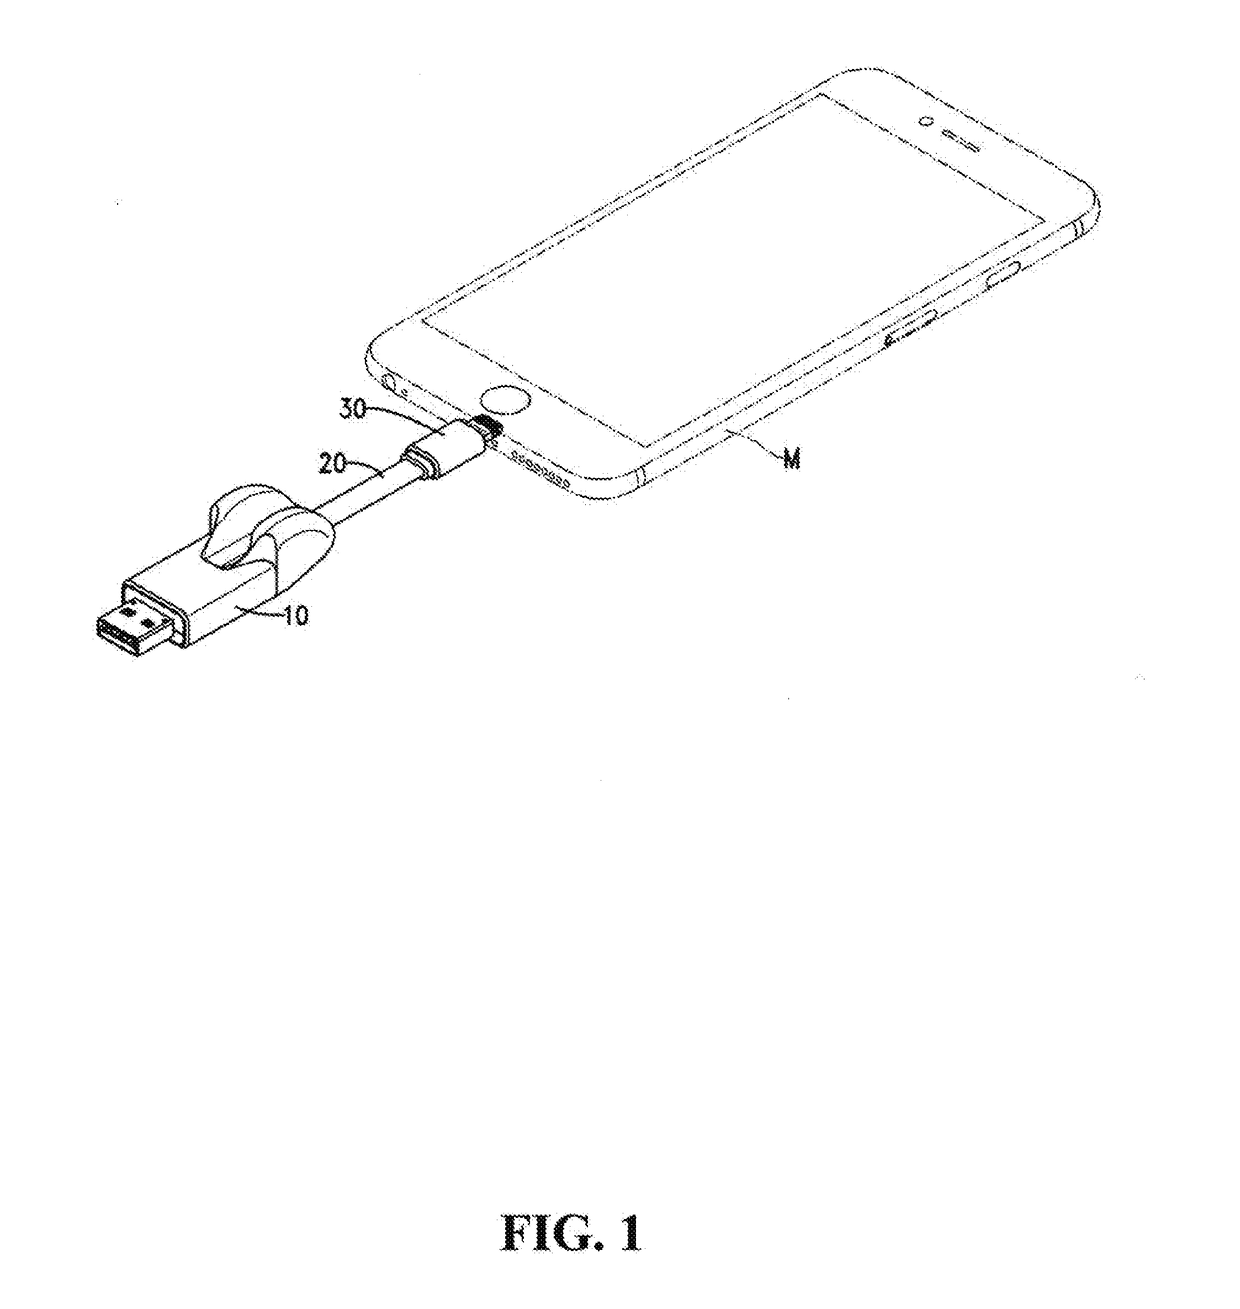 Electronic storage and transmission device